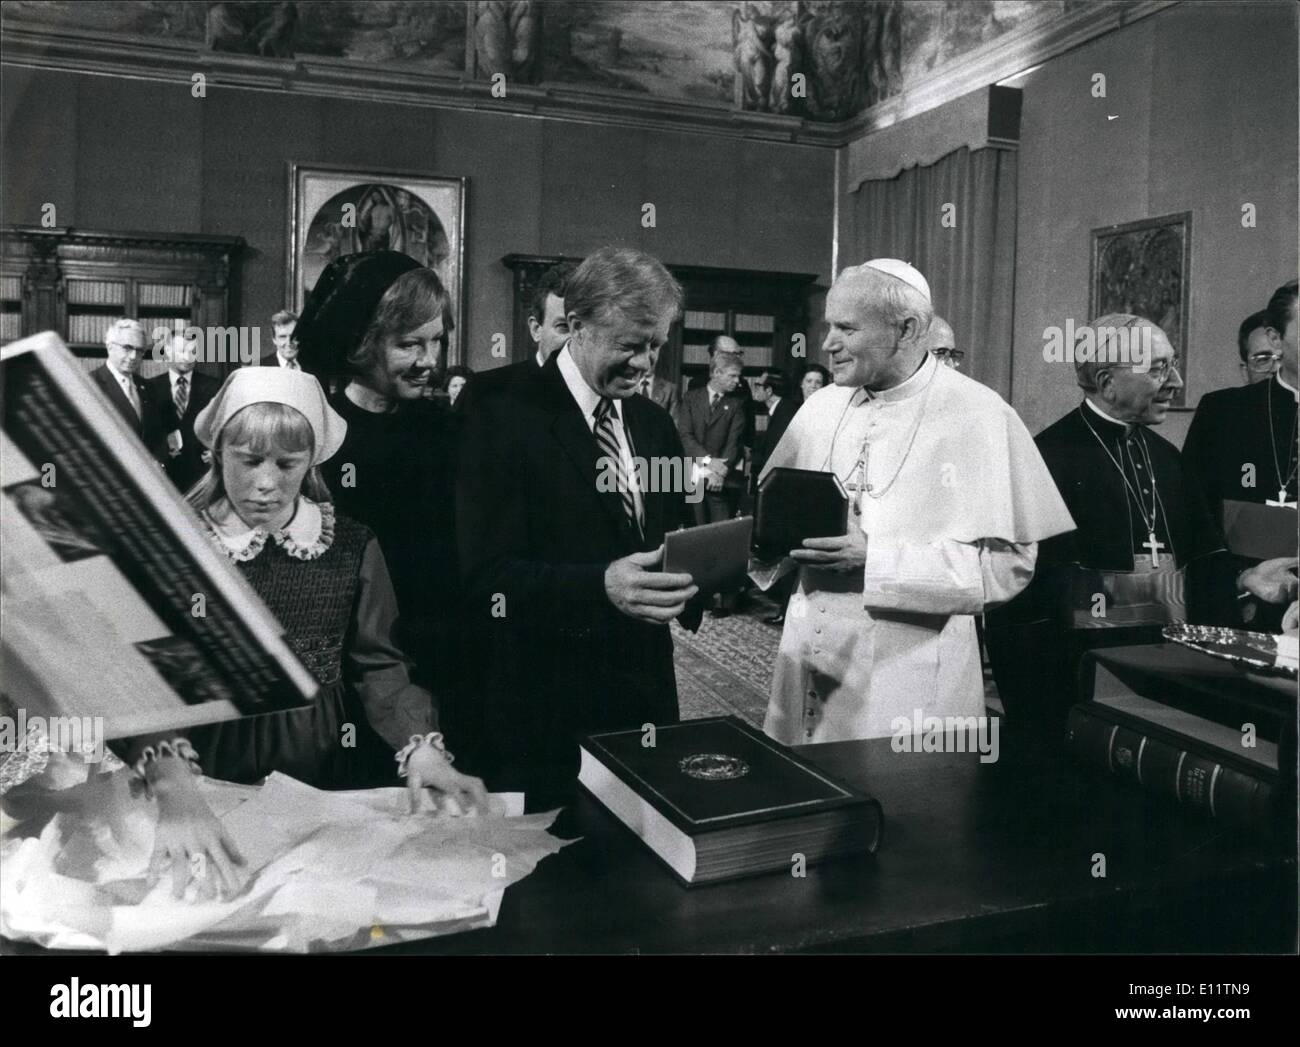 Jul. 07, 1980 - President Carter At The Vatican: President Carter met Pope John Paul II during his recent Visit to the Vatican. Stock Photo